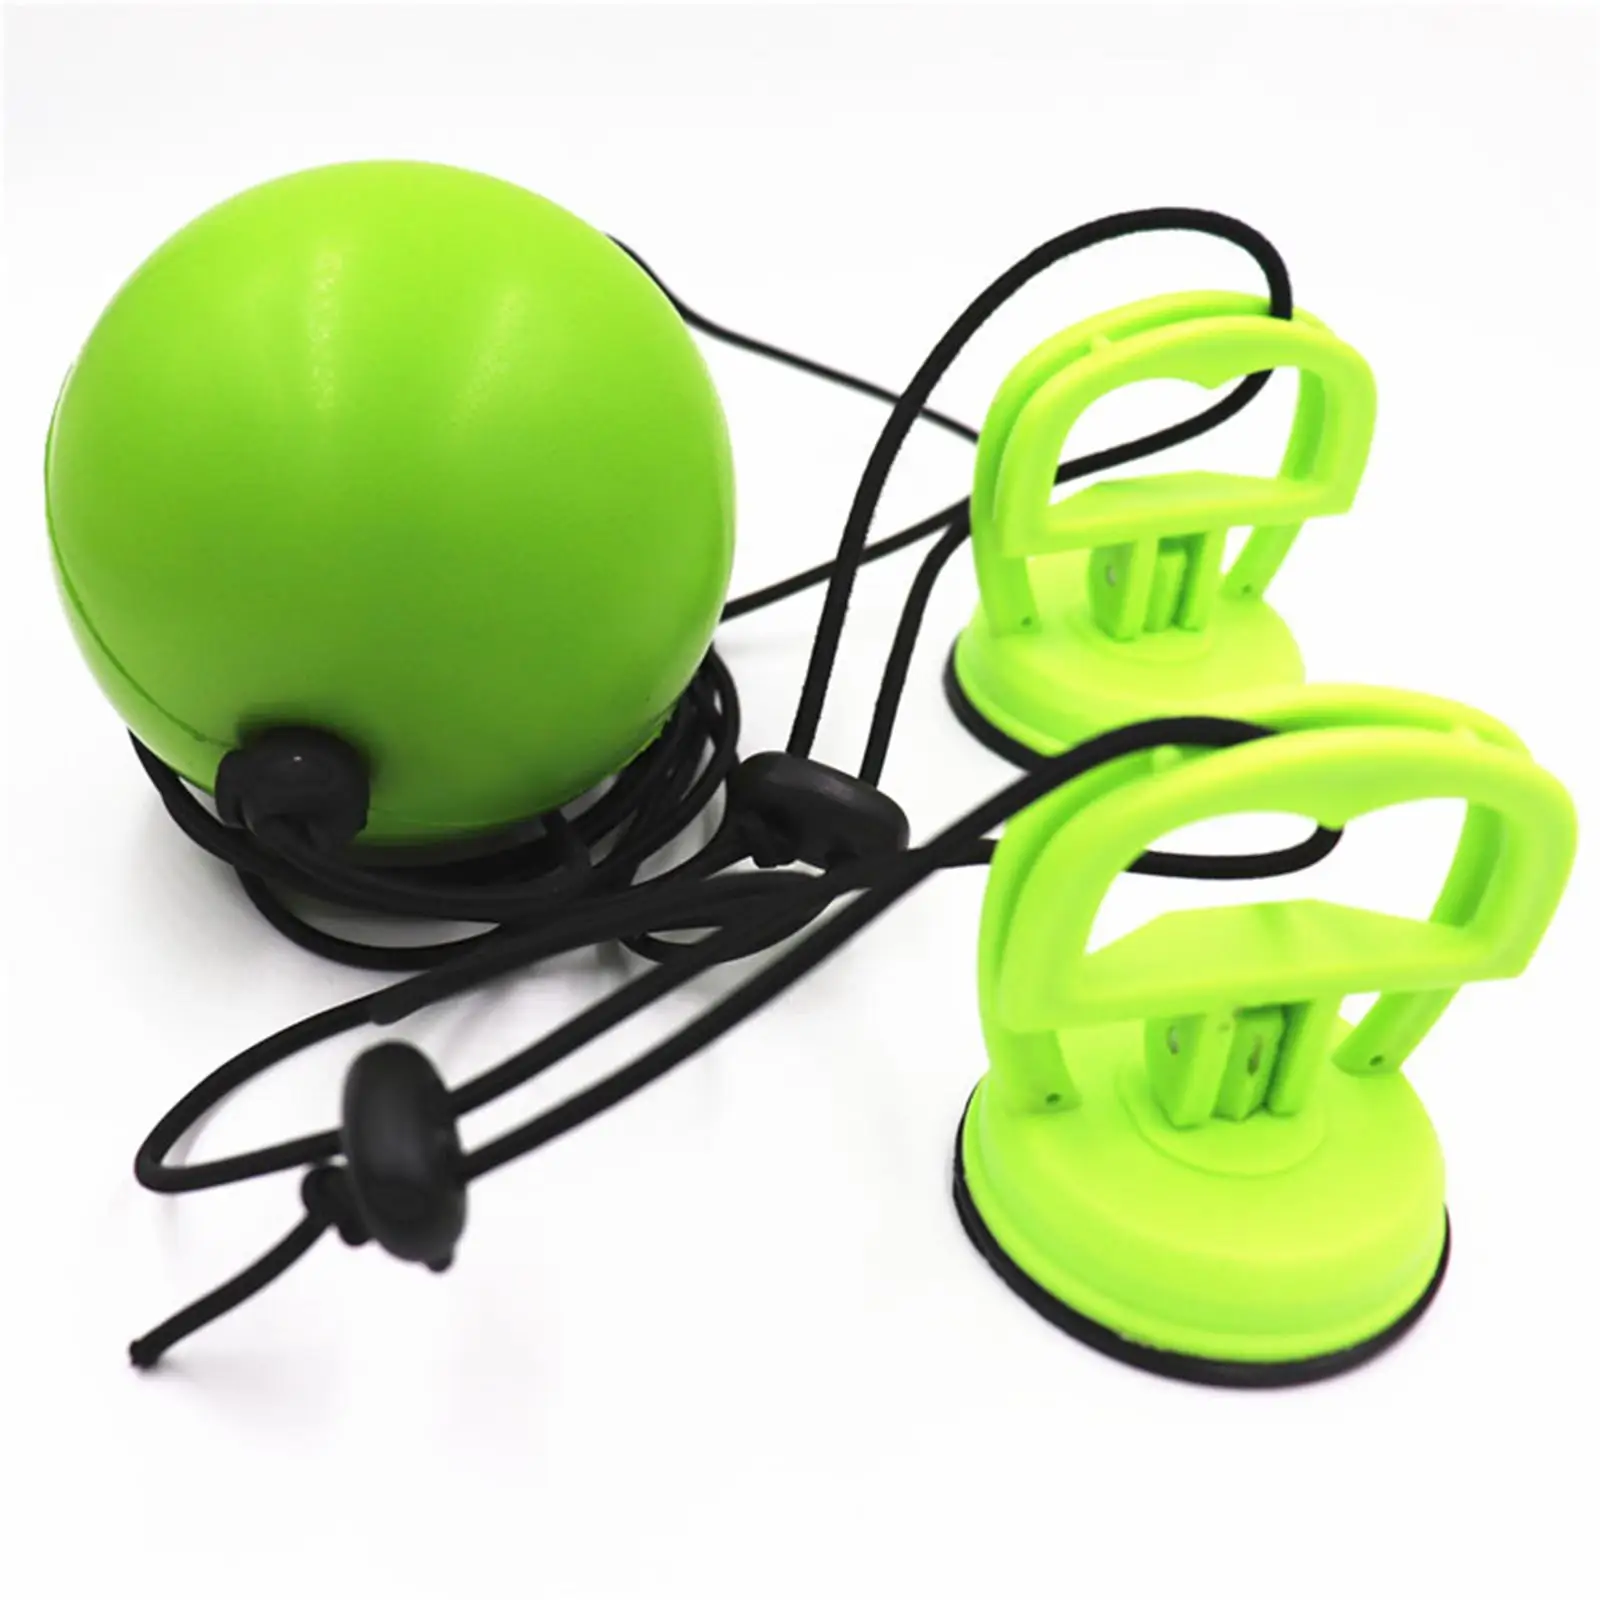  Bag Training Double End Punching Ball Adjustable Floor to Ceiling  Boxing  Ball for Coordination Agility